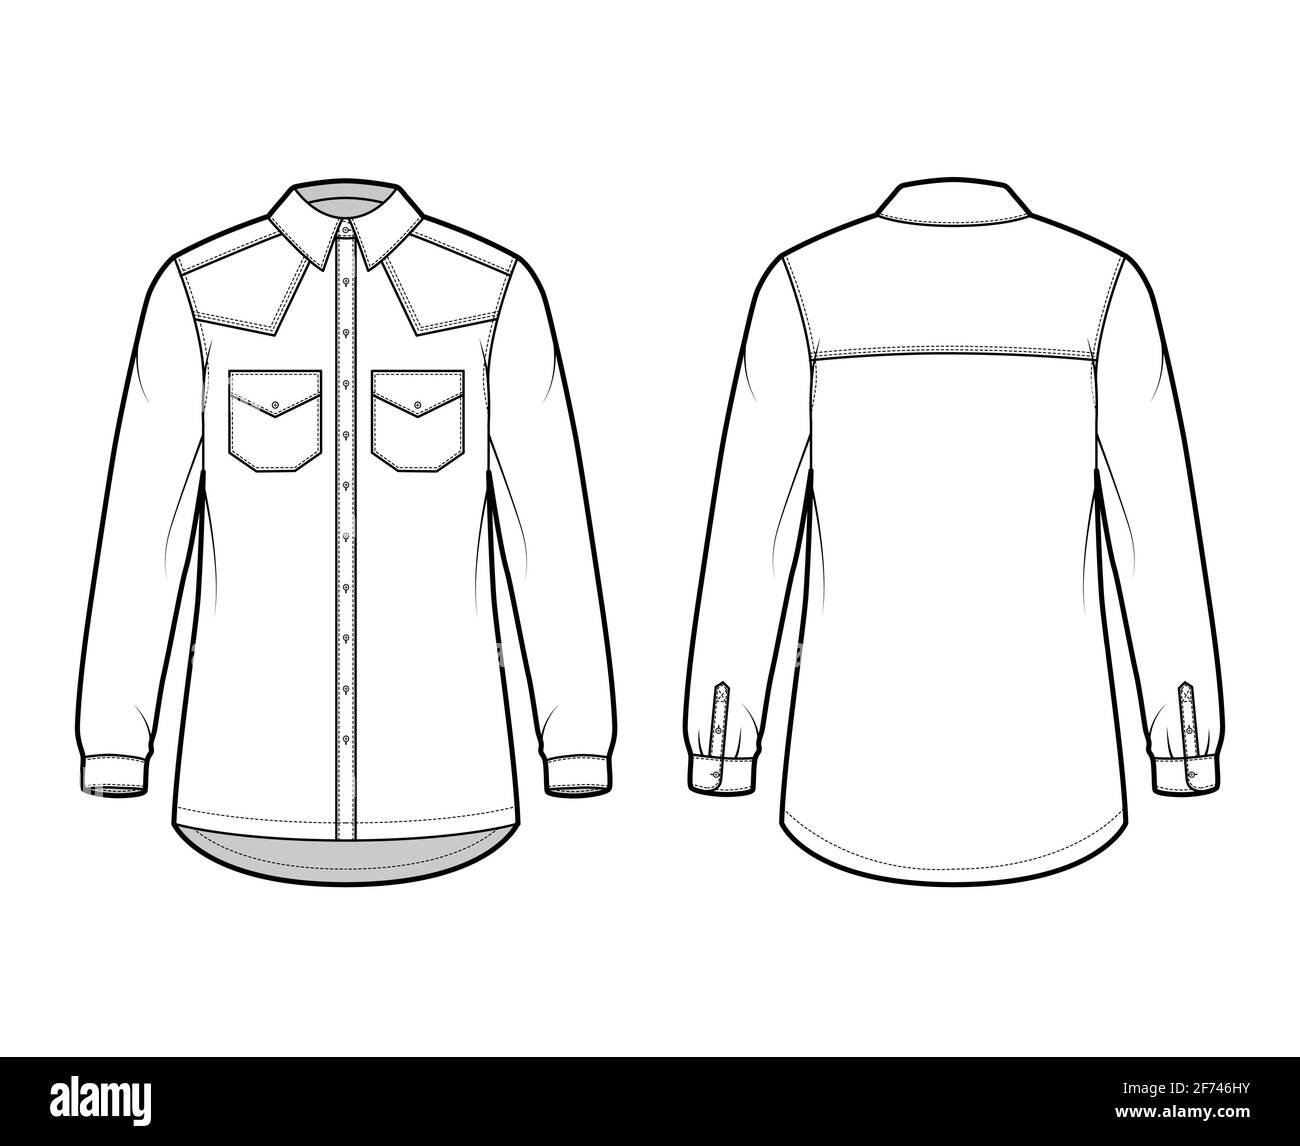 Denim shirt jacket technical fashion illustration with oversized body, flap pockets, button closure, classic collar, long sleeves. Flat apparel front, back, white color style. Women, men CAD mockup Stock Vector